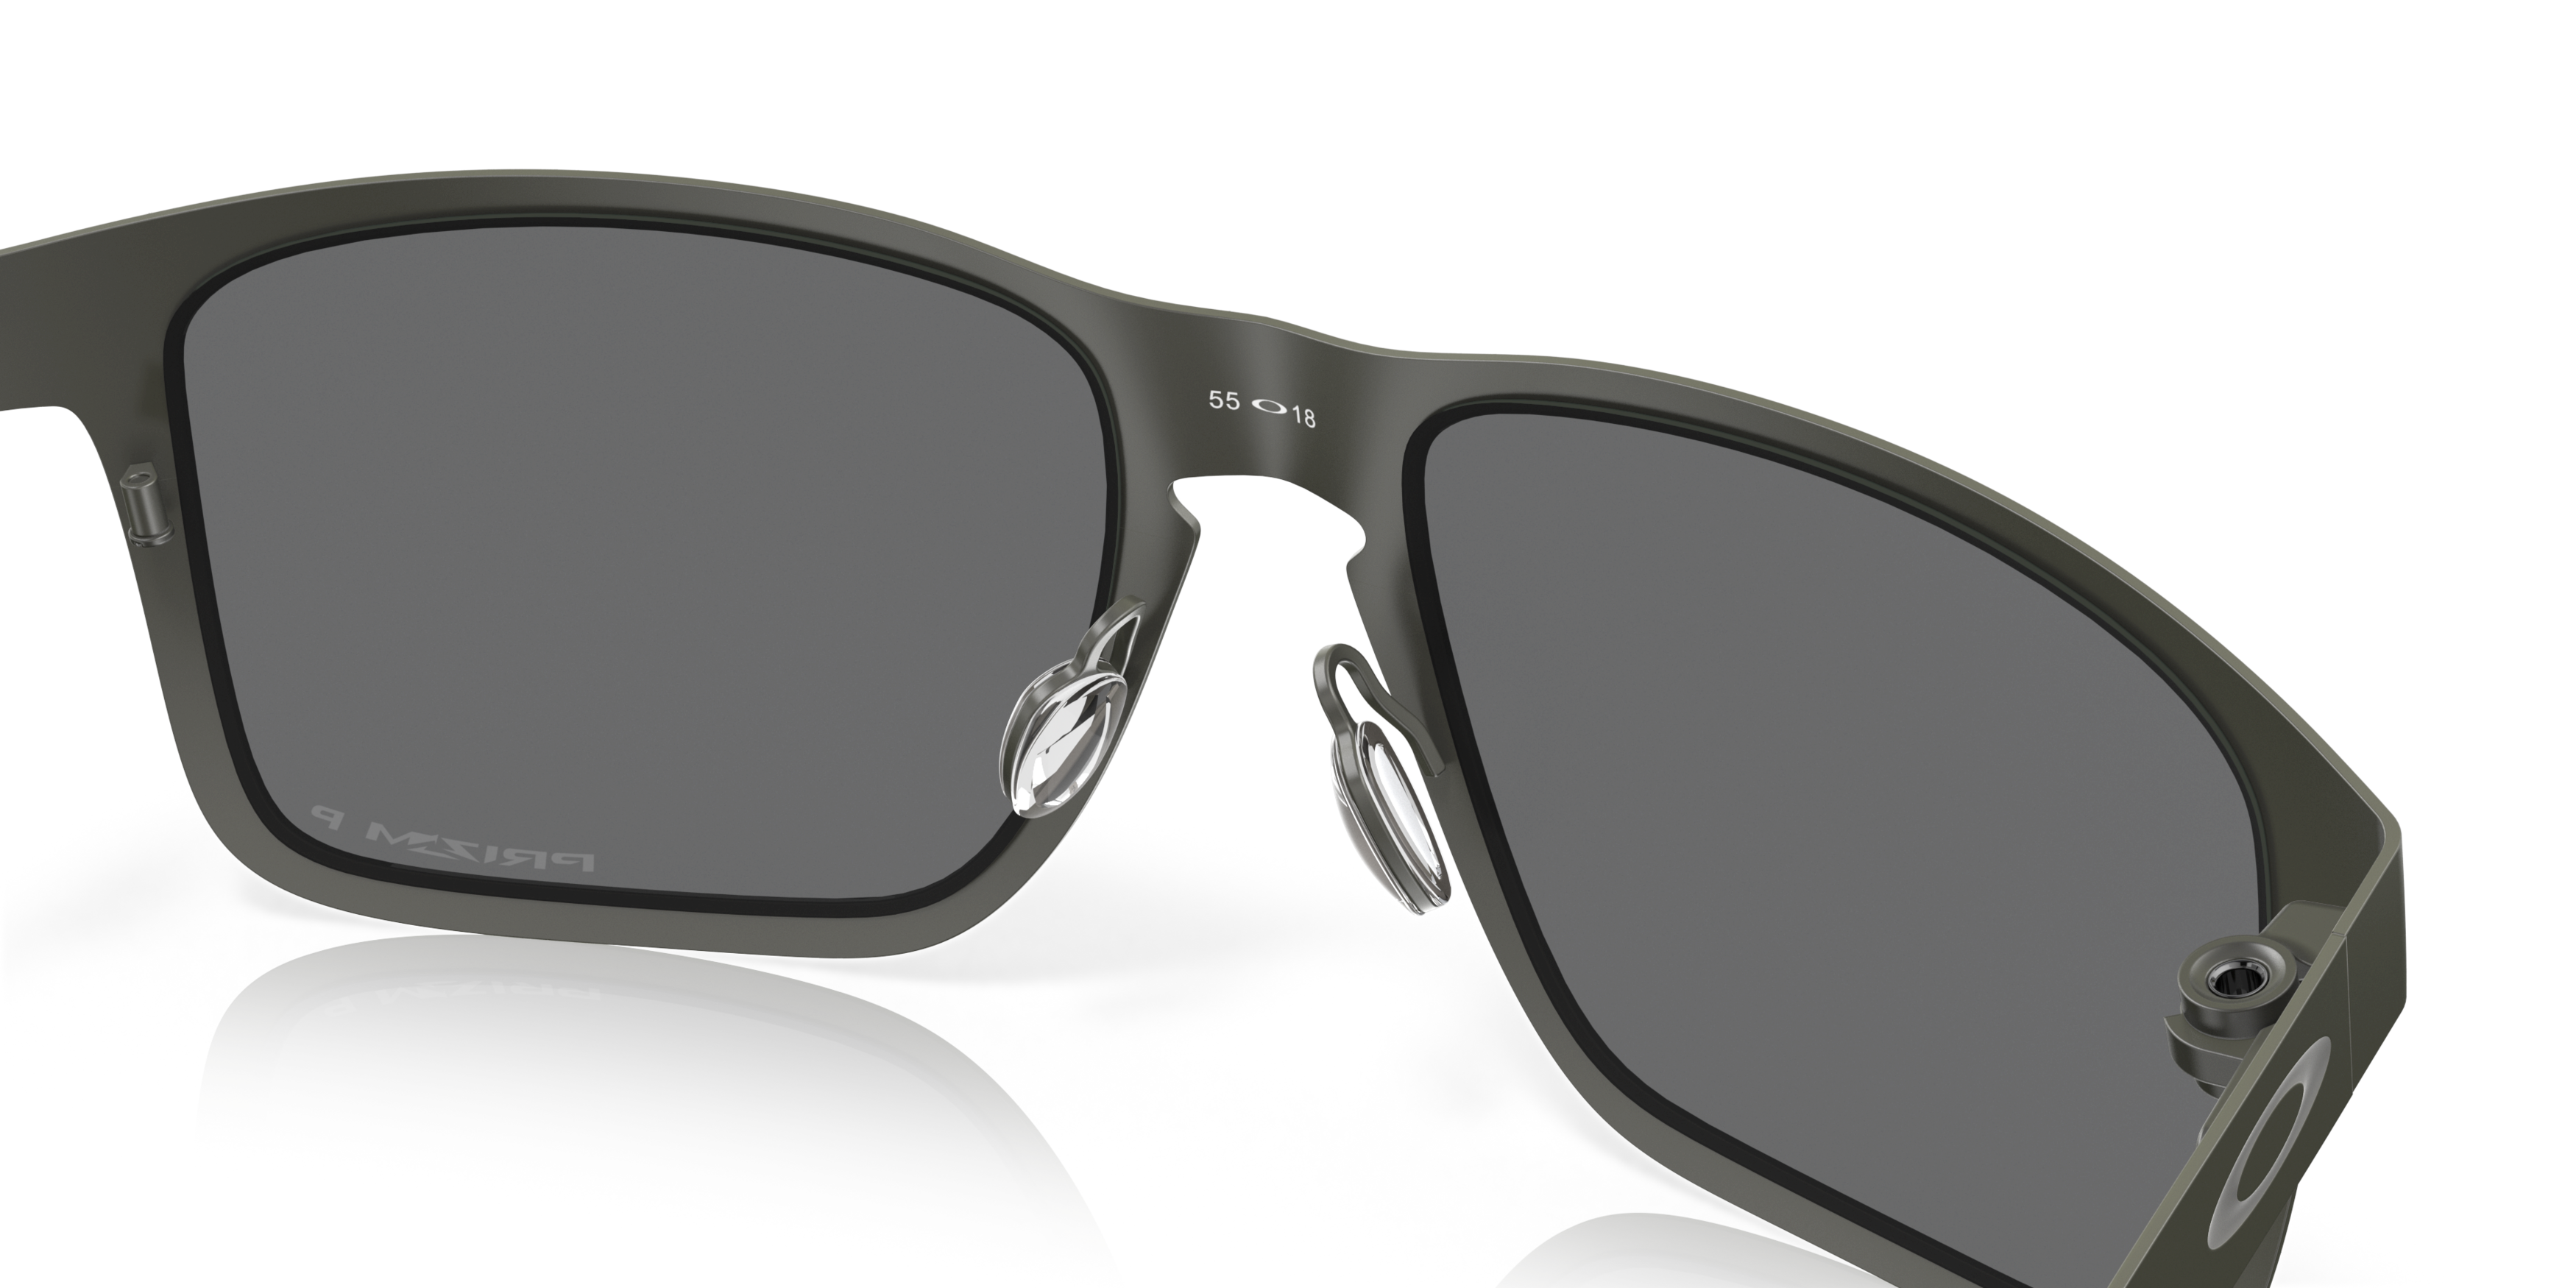 [products.image.detail03] OAKLEY HOLBROOK METAL OO4123 412306